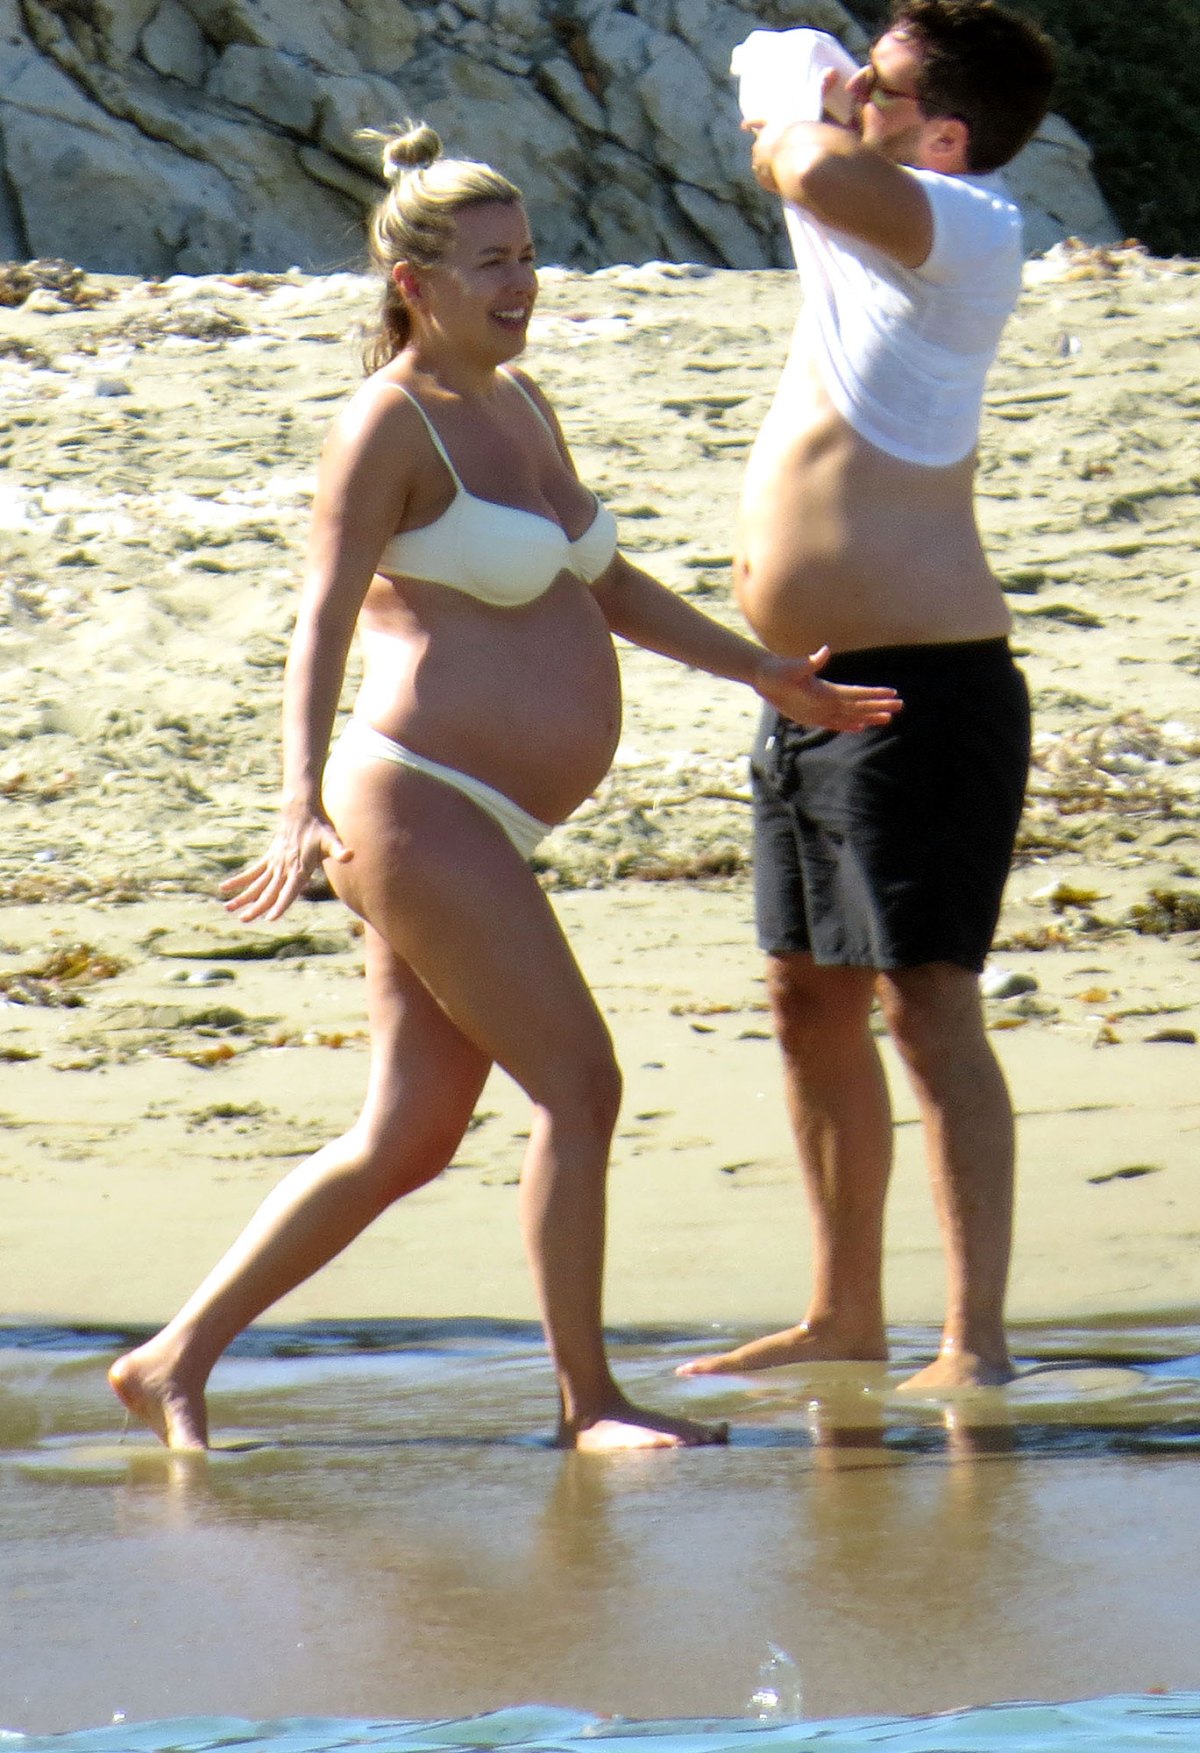 Candid Beach Shower - Pregnant Katy Perry Shows Baby Bump at Beach With Friends: Pics